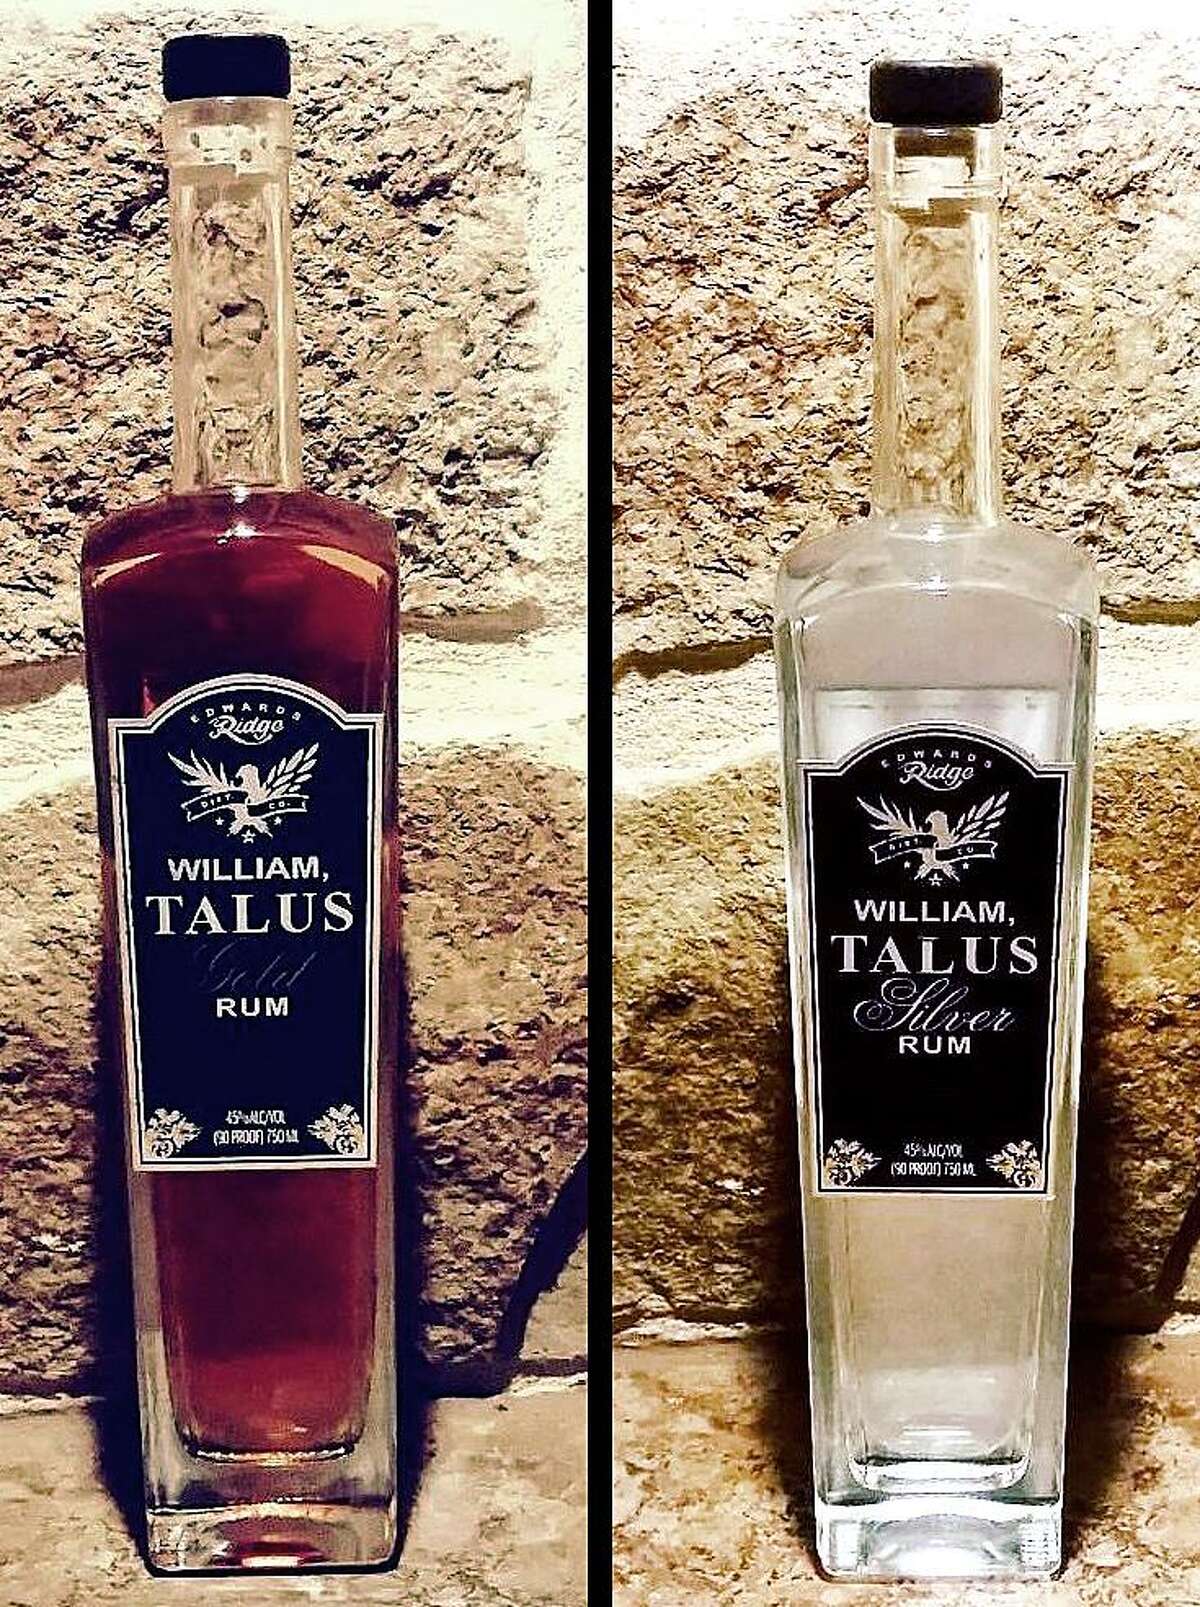 Edwards Ridge Distillery produces William, Talus gold and silver rums distilled from molasses.